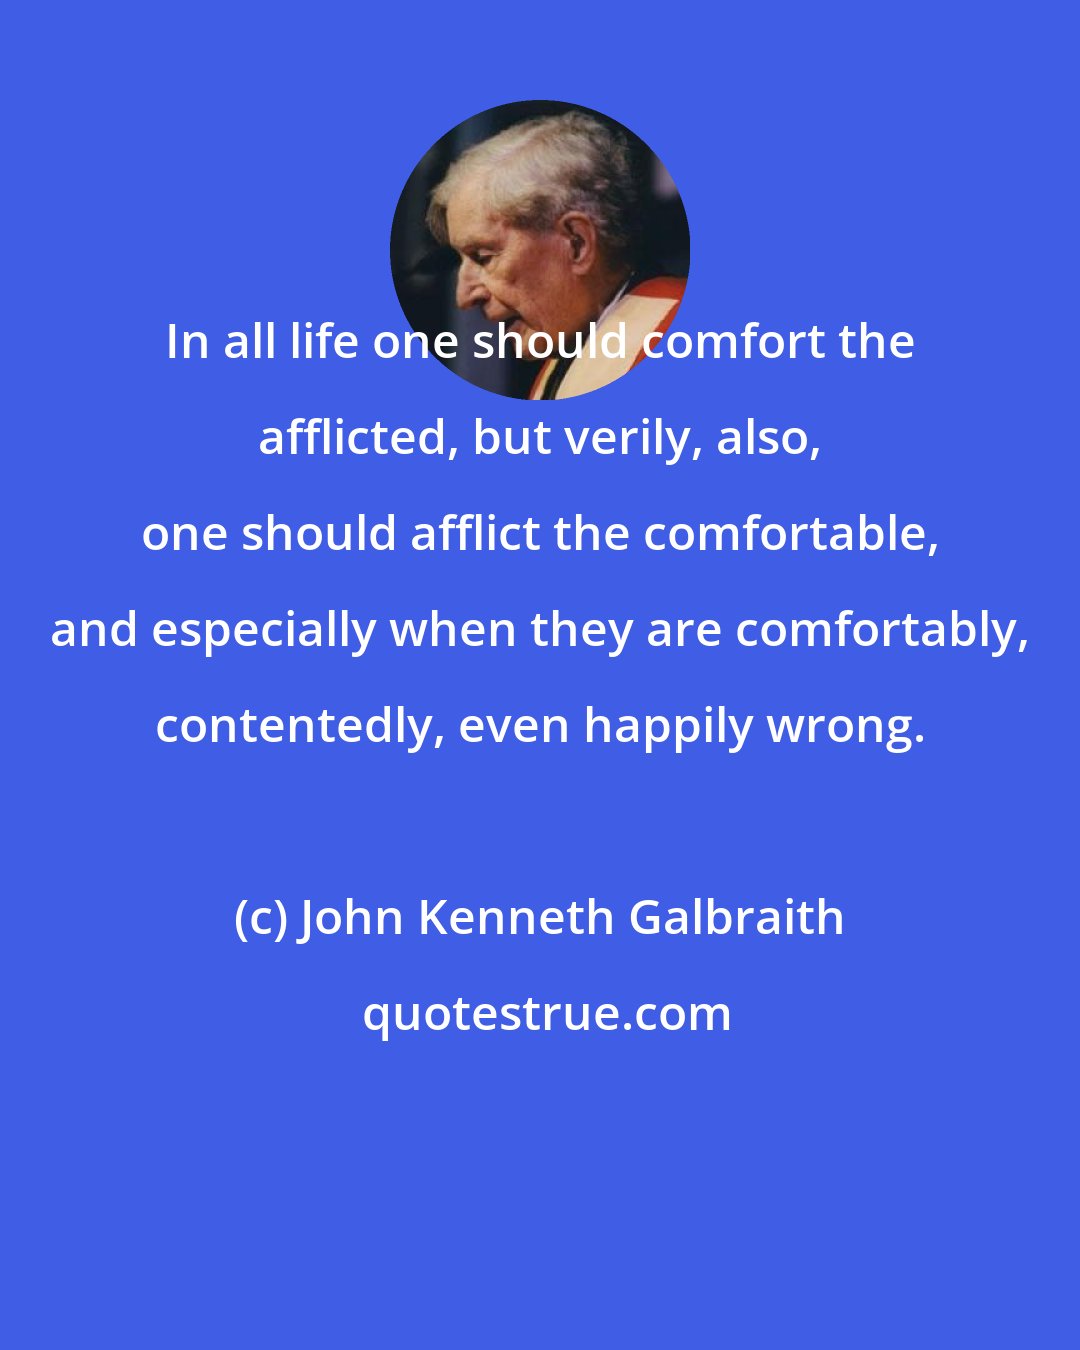 John Kenneth Galbraith: In all life one should comfort the afflicted, but verily, also, one should afflict the comfortable, and especially when they are comfortably, contentedly, even happily wrong.